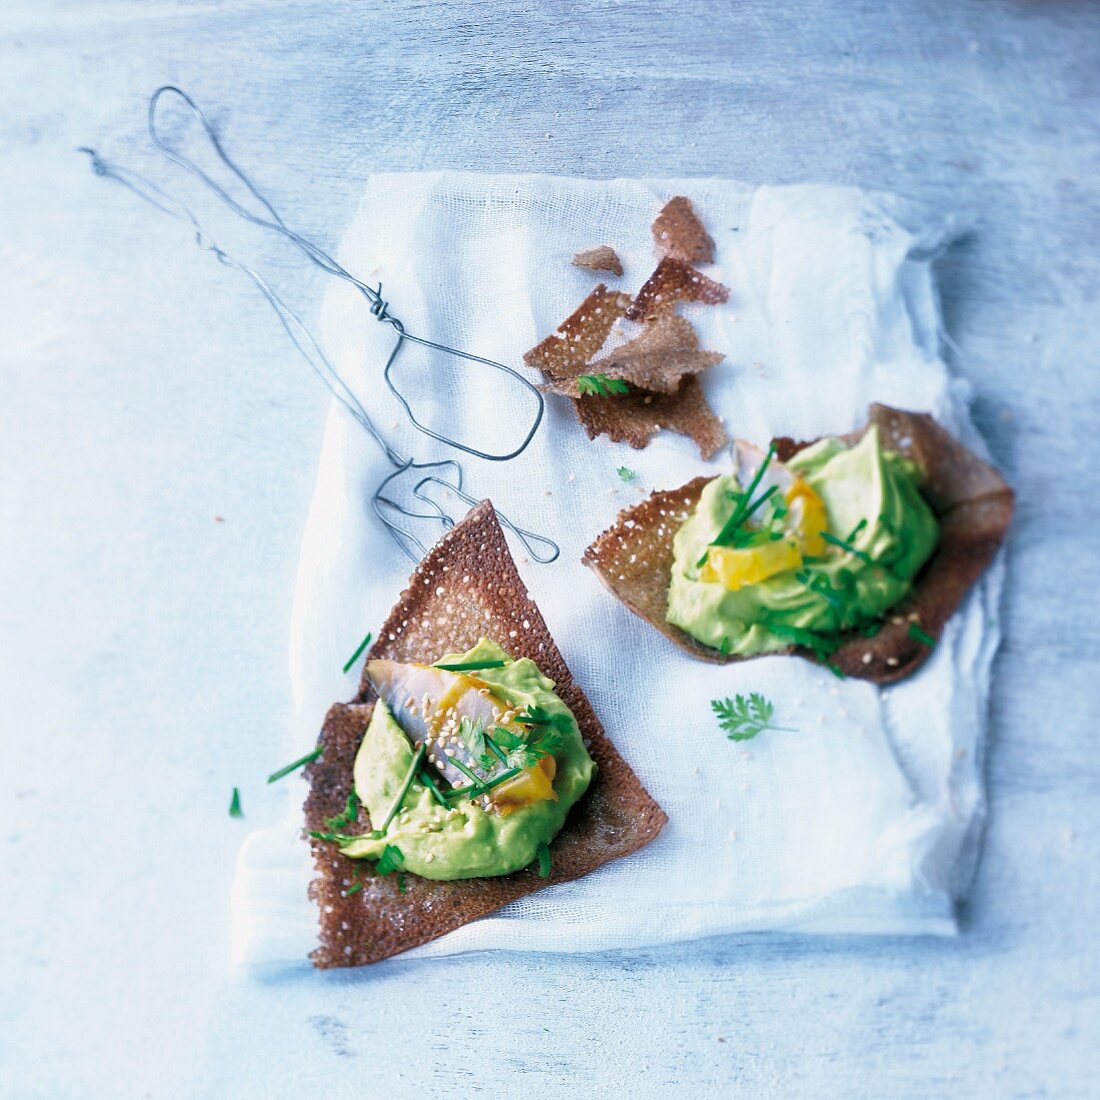 Bite-size crisp galettes with guacamole and mackerels